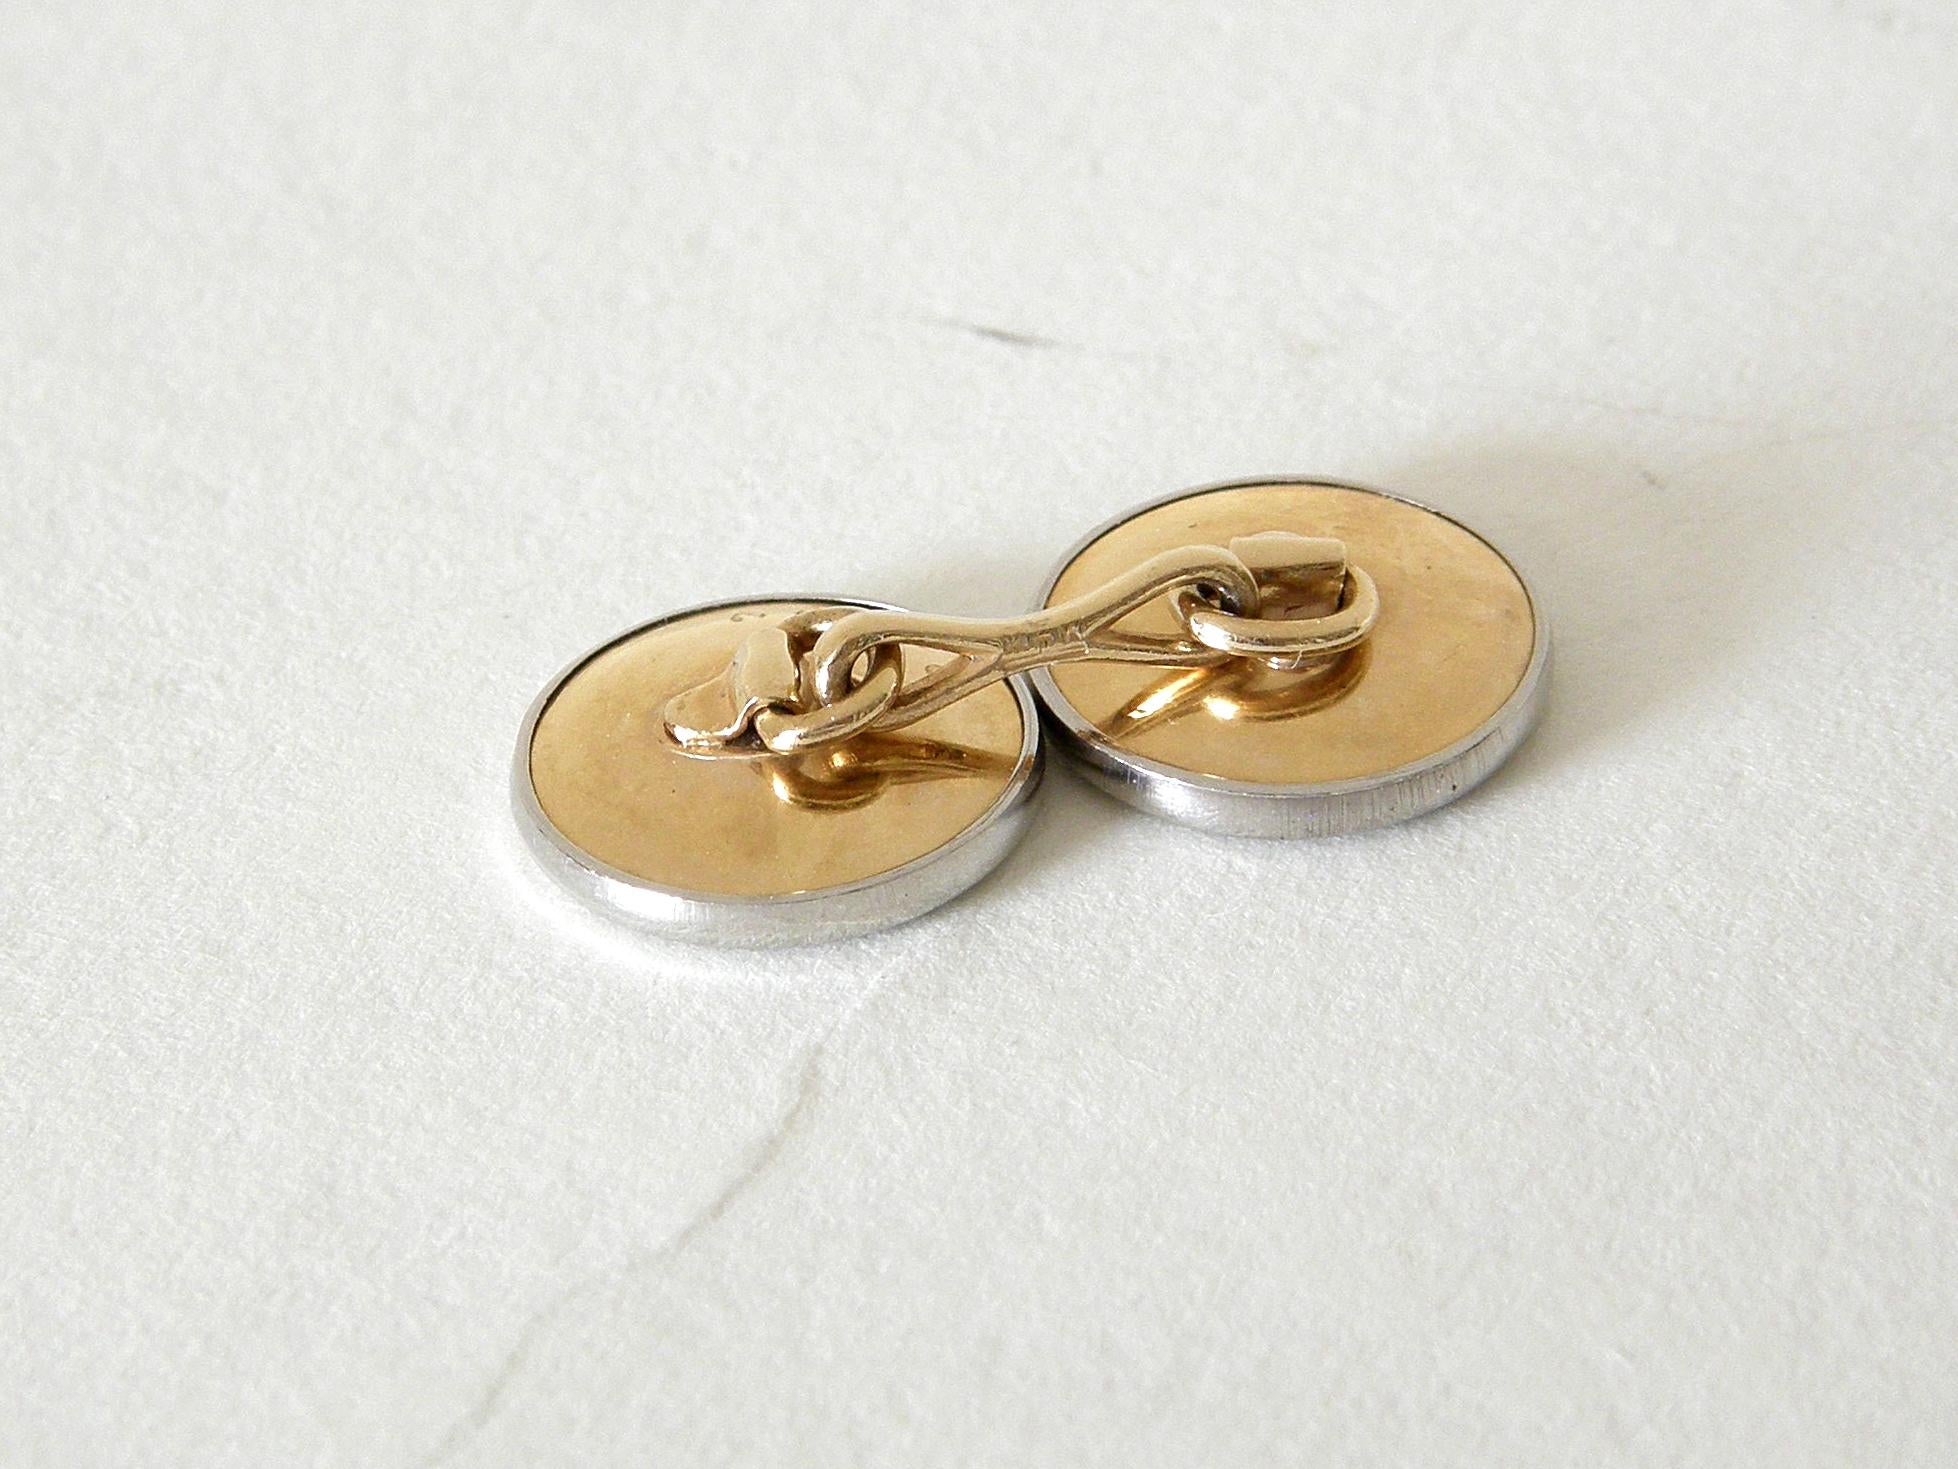 Women's or Men's Cartier 14K Gold Cufflinks and Studs Set with Mother of Pearl by Larter and Sons